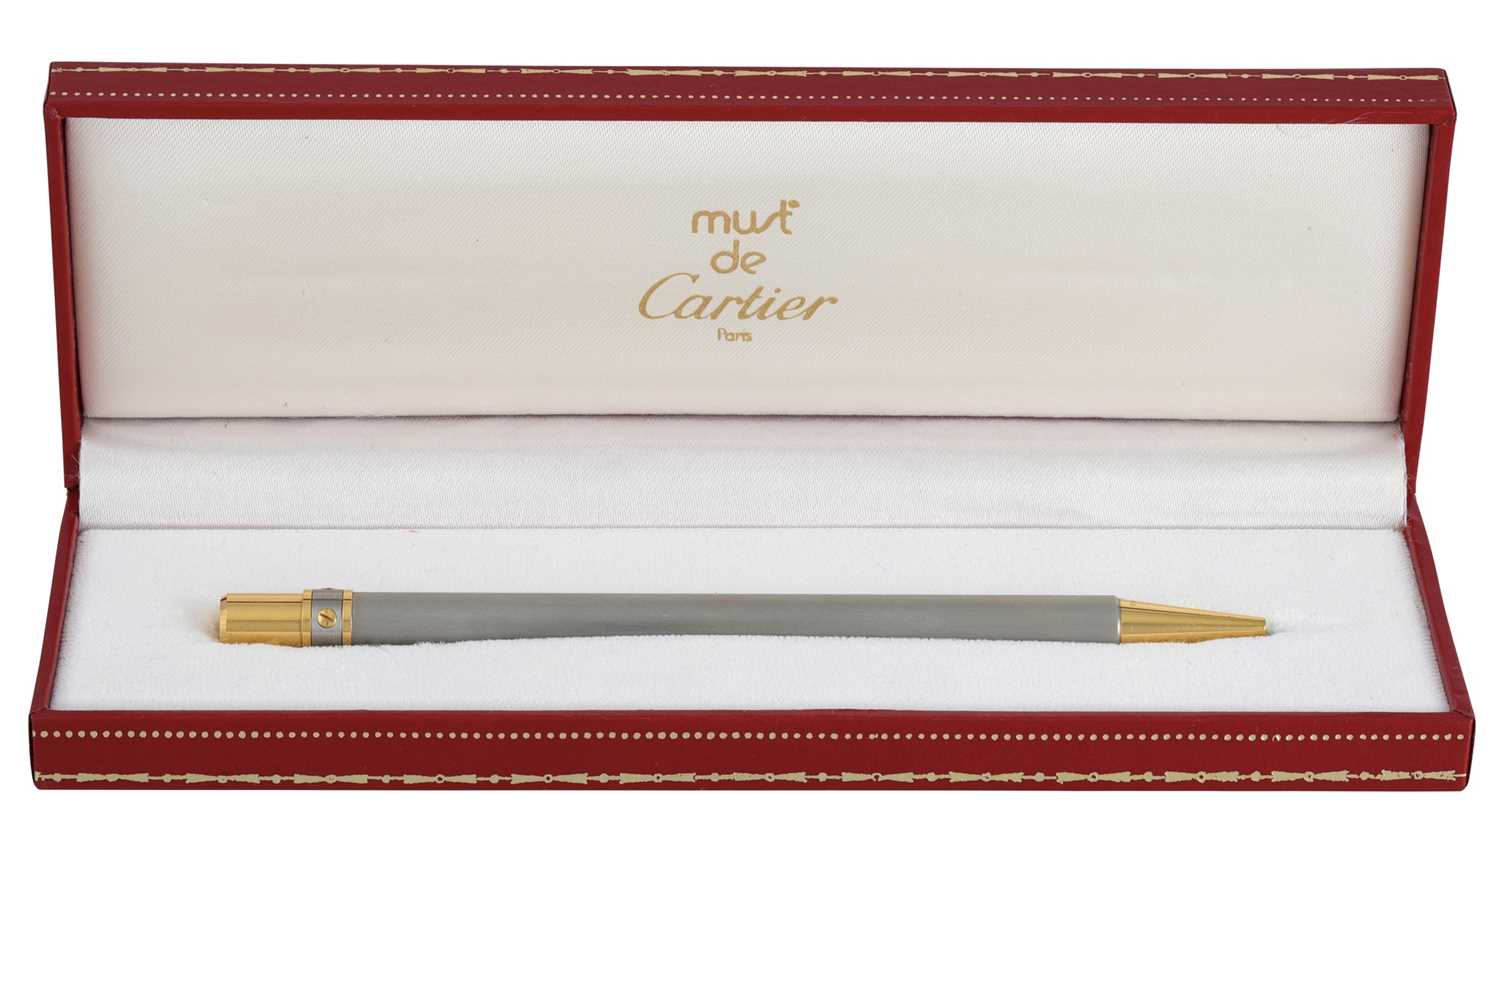 Lot 299 - A MUST DE CARTIER PEN, boxed together with a...